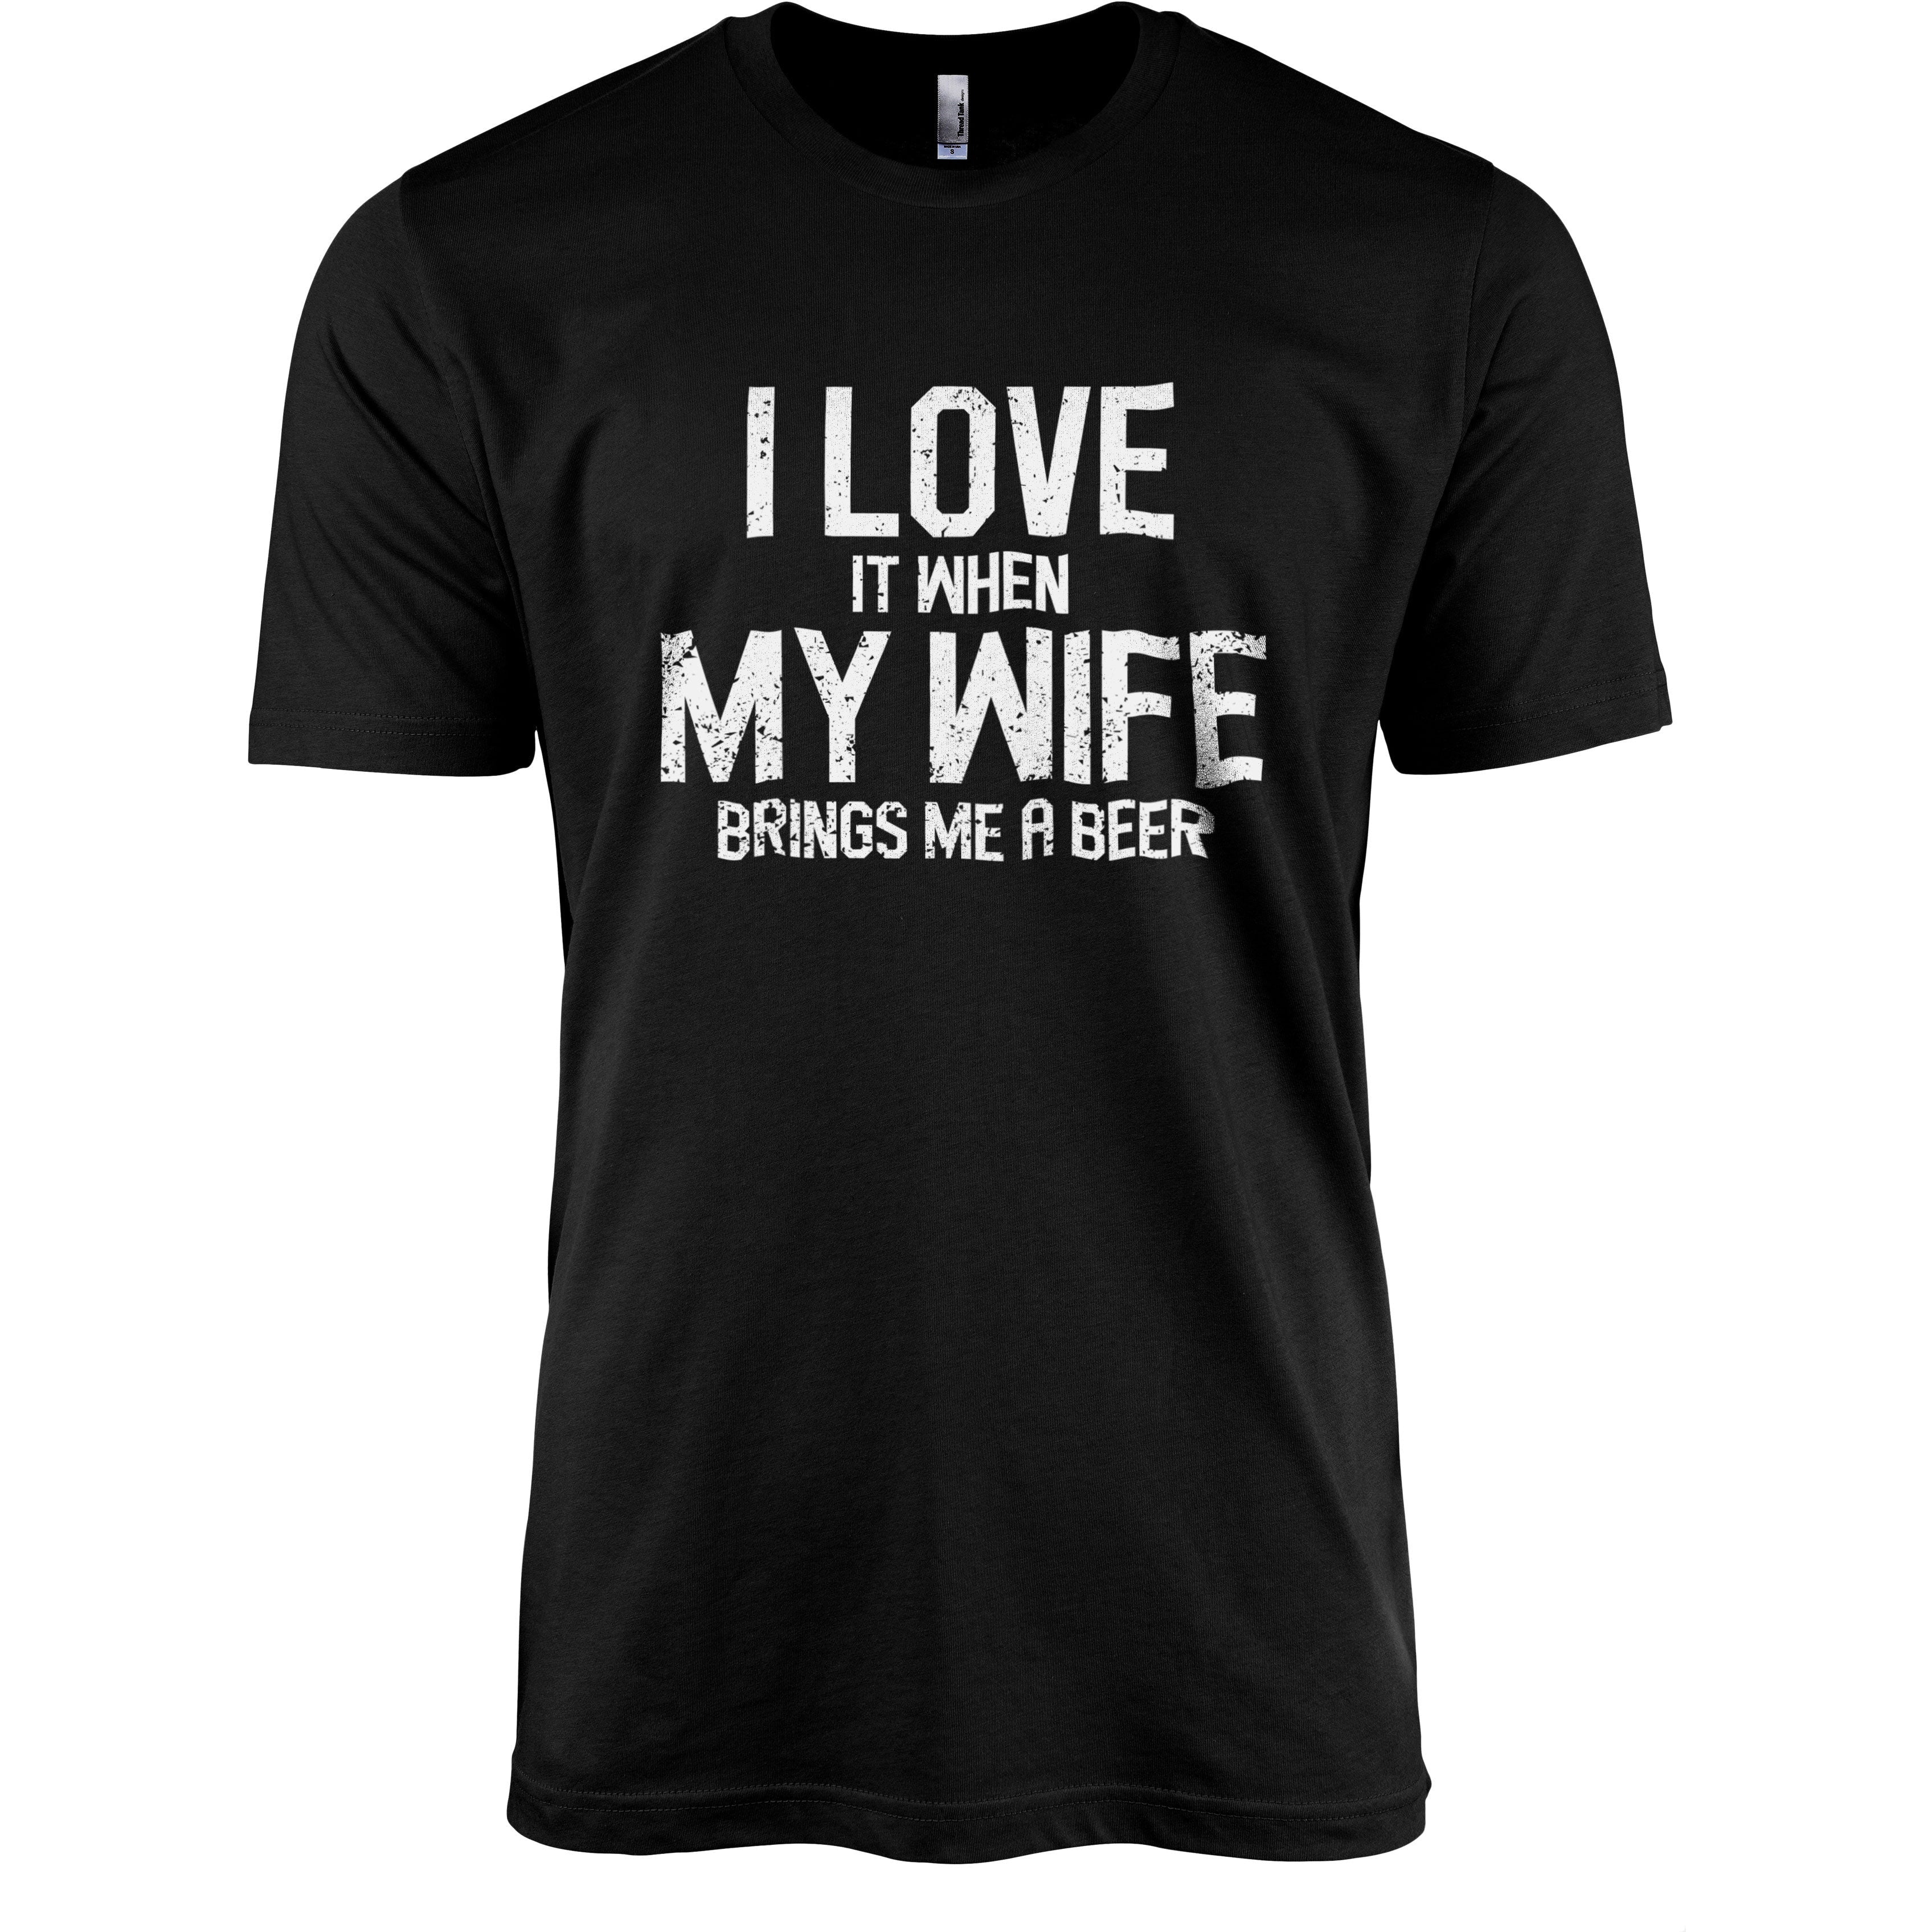 I Love It When My Wife Brings Me A Beer Printed Graphic Men's Crew T-shirt  Tee